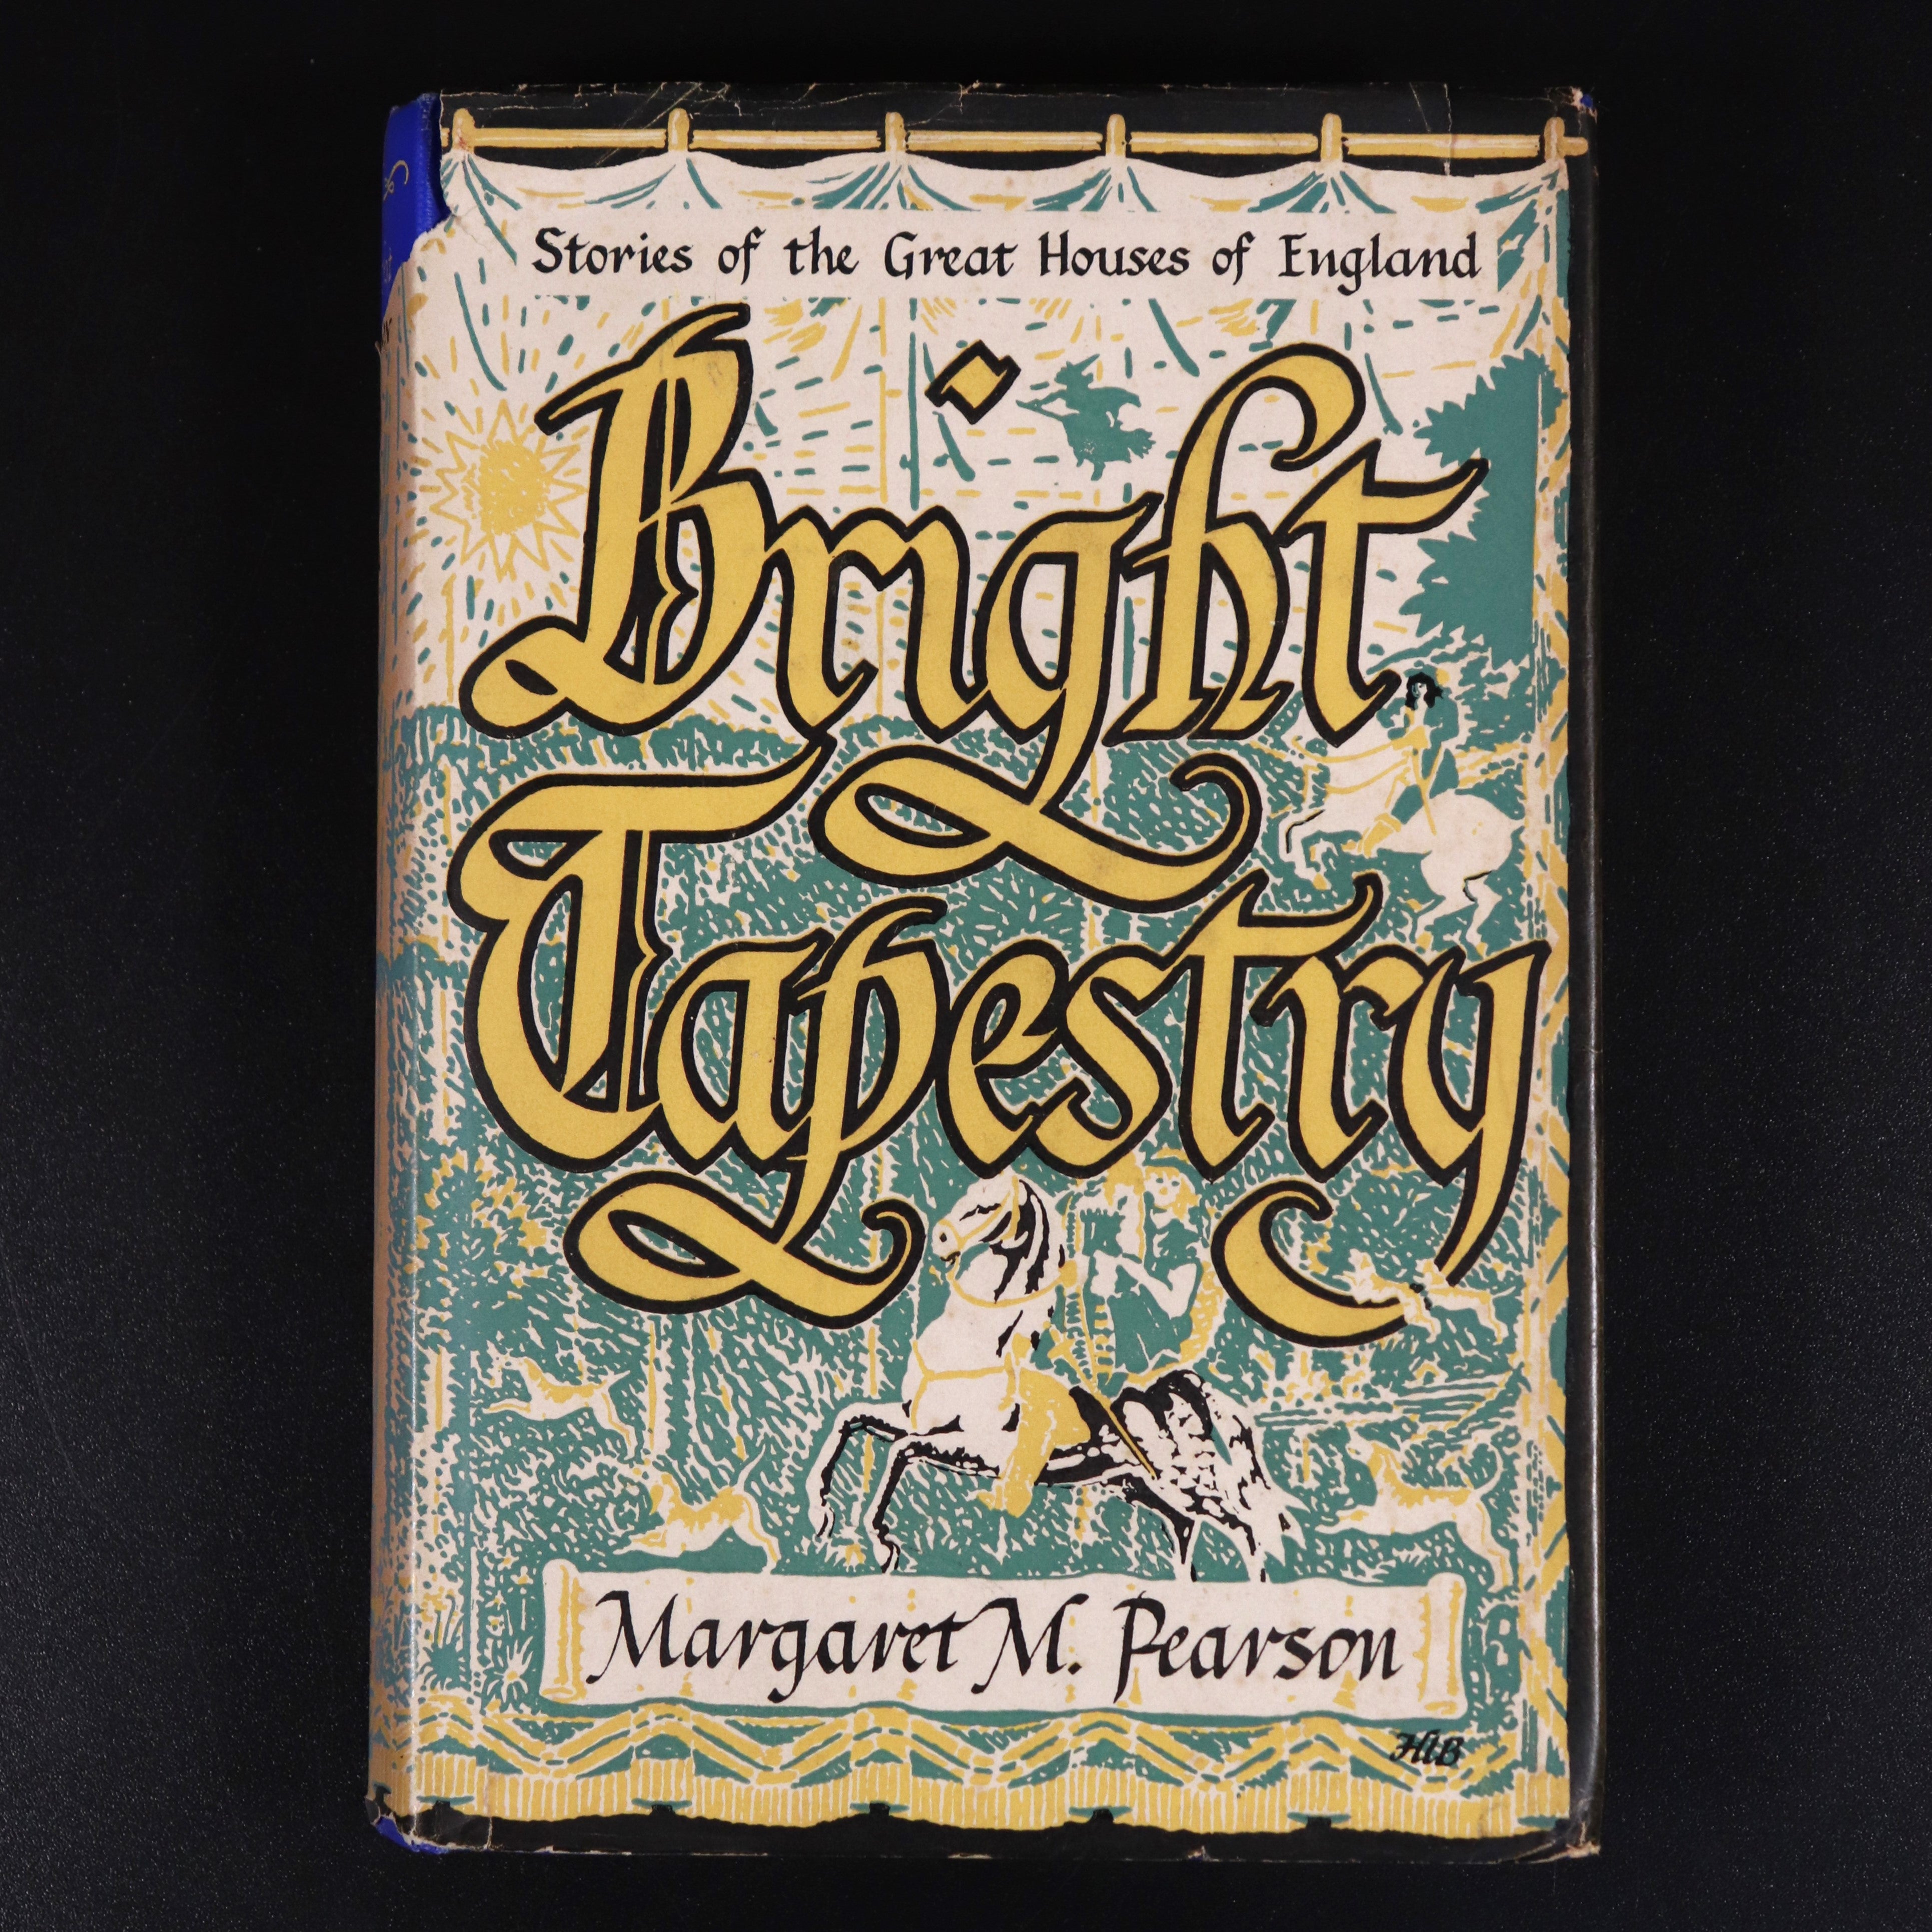 1956 Bright Tapestry by Margaret M. Pearson British Architecture History Book